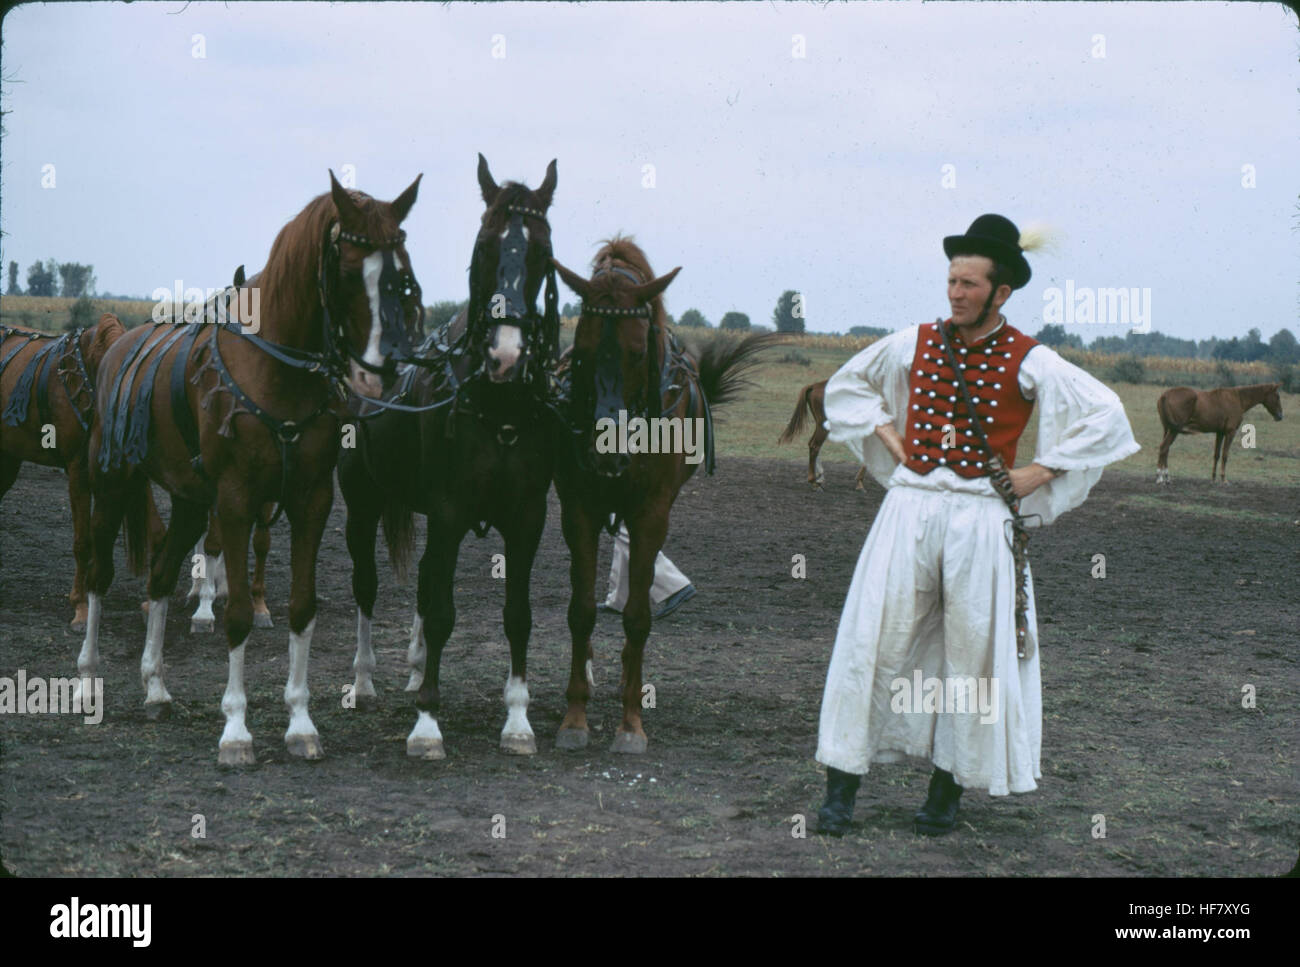 Horses in the steppes of the Puszta, Hungary.  Flamboyant traditional outfit of the horseman. Stock Photo